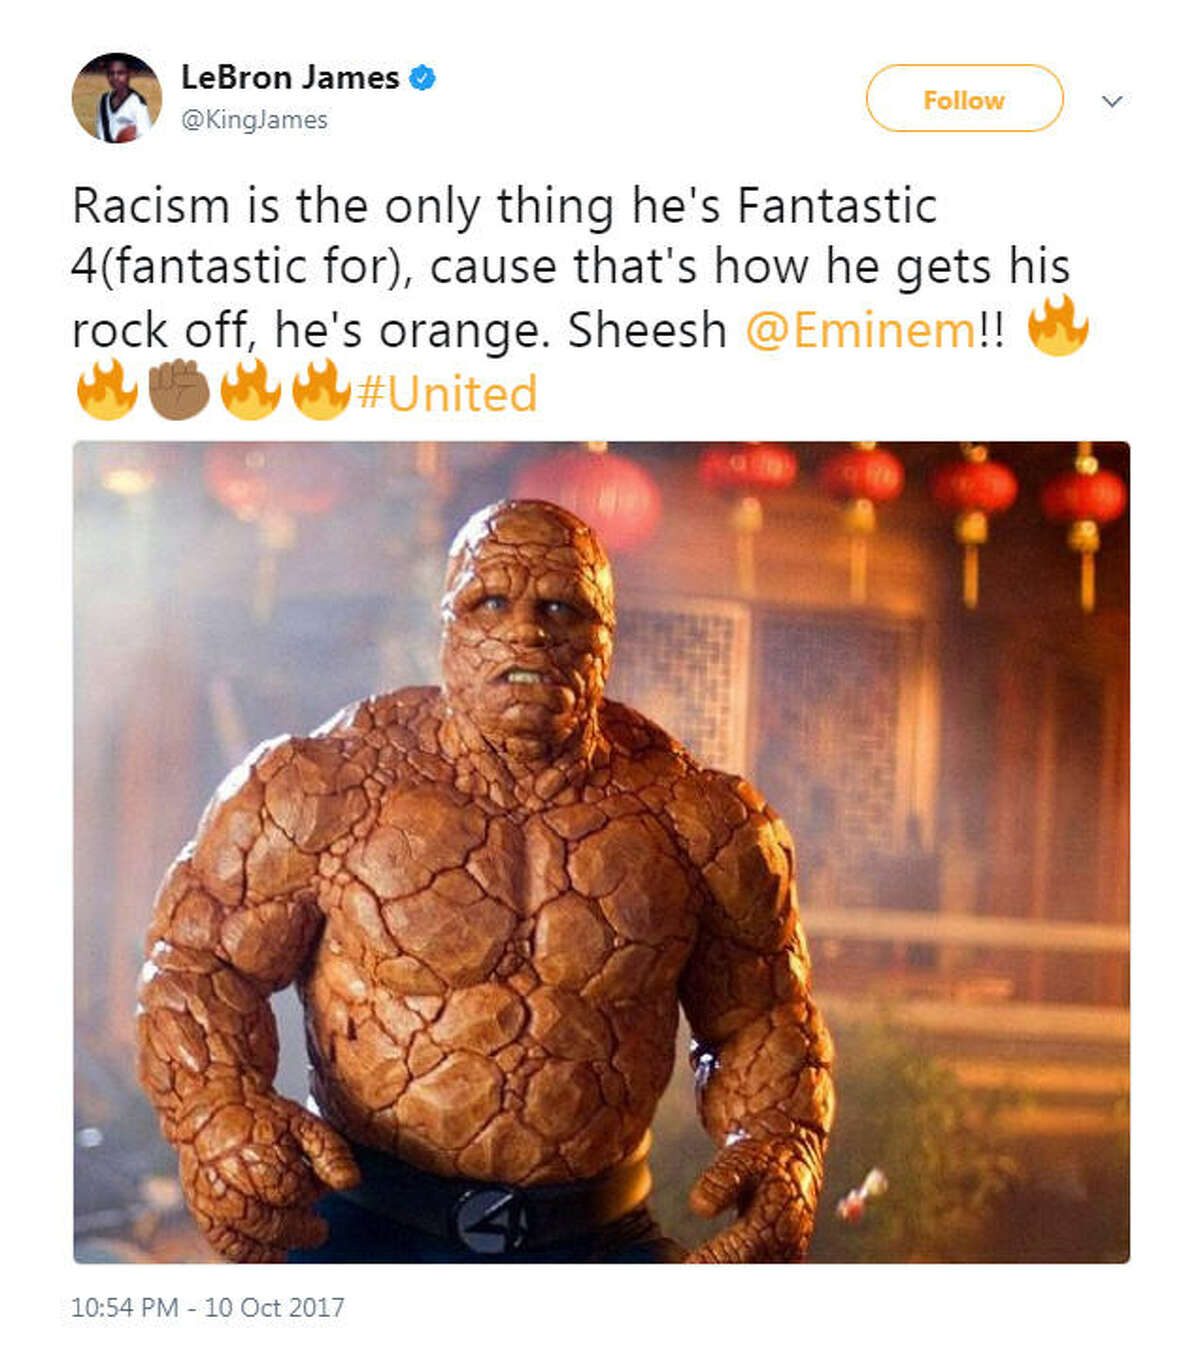 "Racism is the only thing he's Fantastic 4(fantastic for), cause that's how he gets his rock off, he's orange. Sheesh @Eminem!!